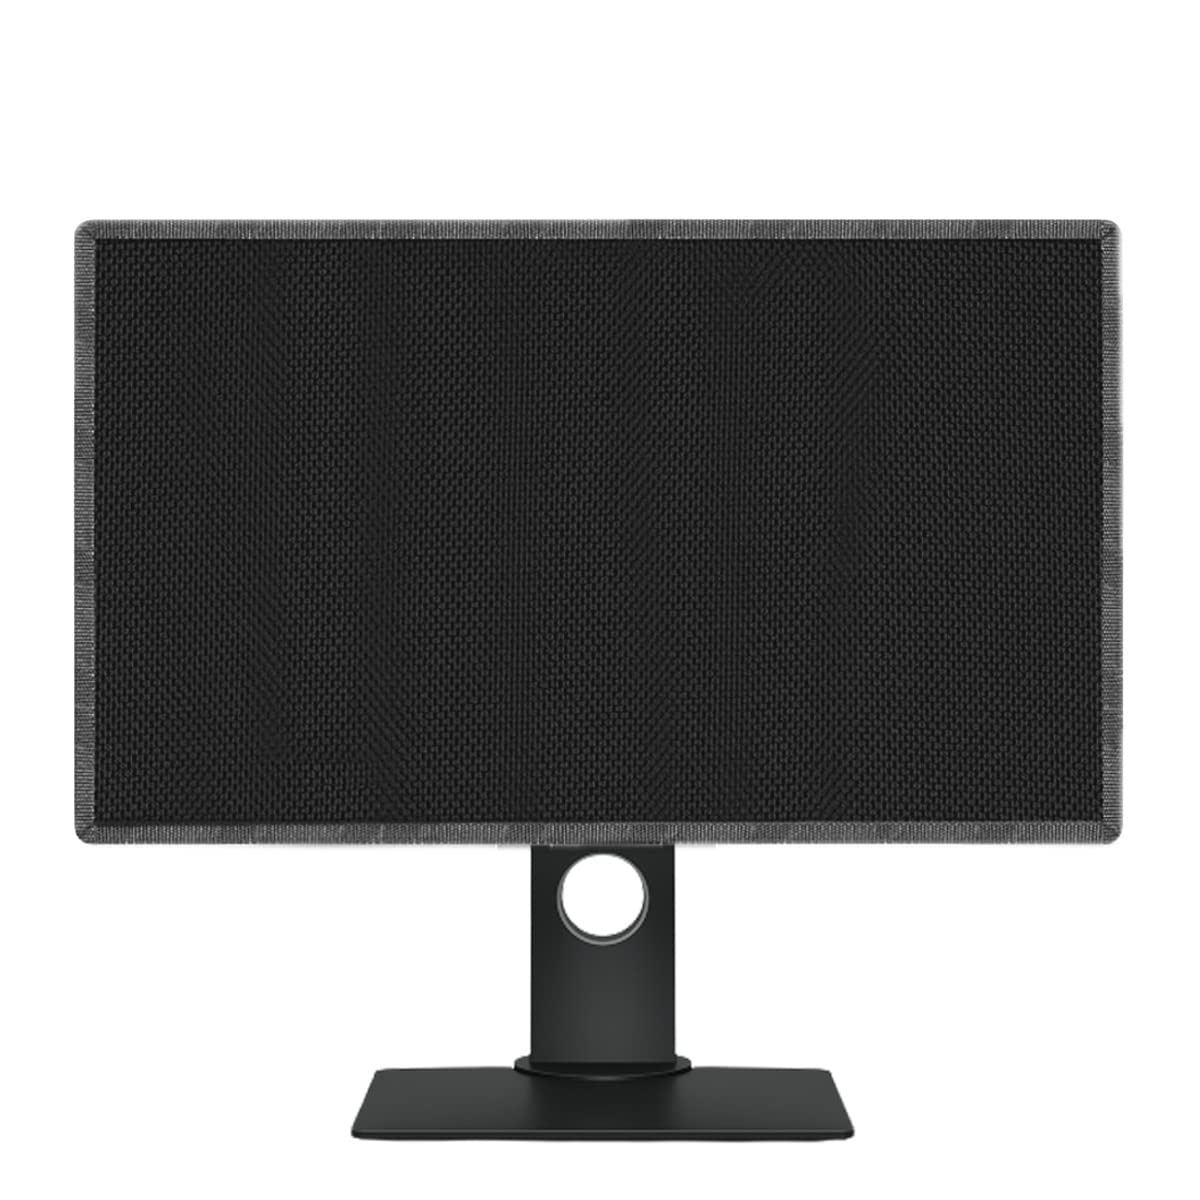 PalaP Super Premium Dust Proof Monitor Cover for MSIOPTIX 24 inches Monitor (Black)